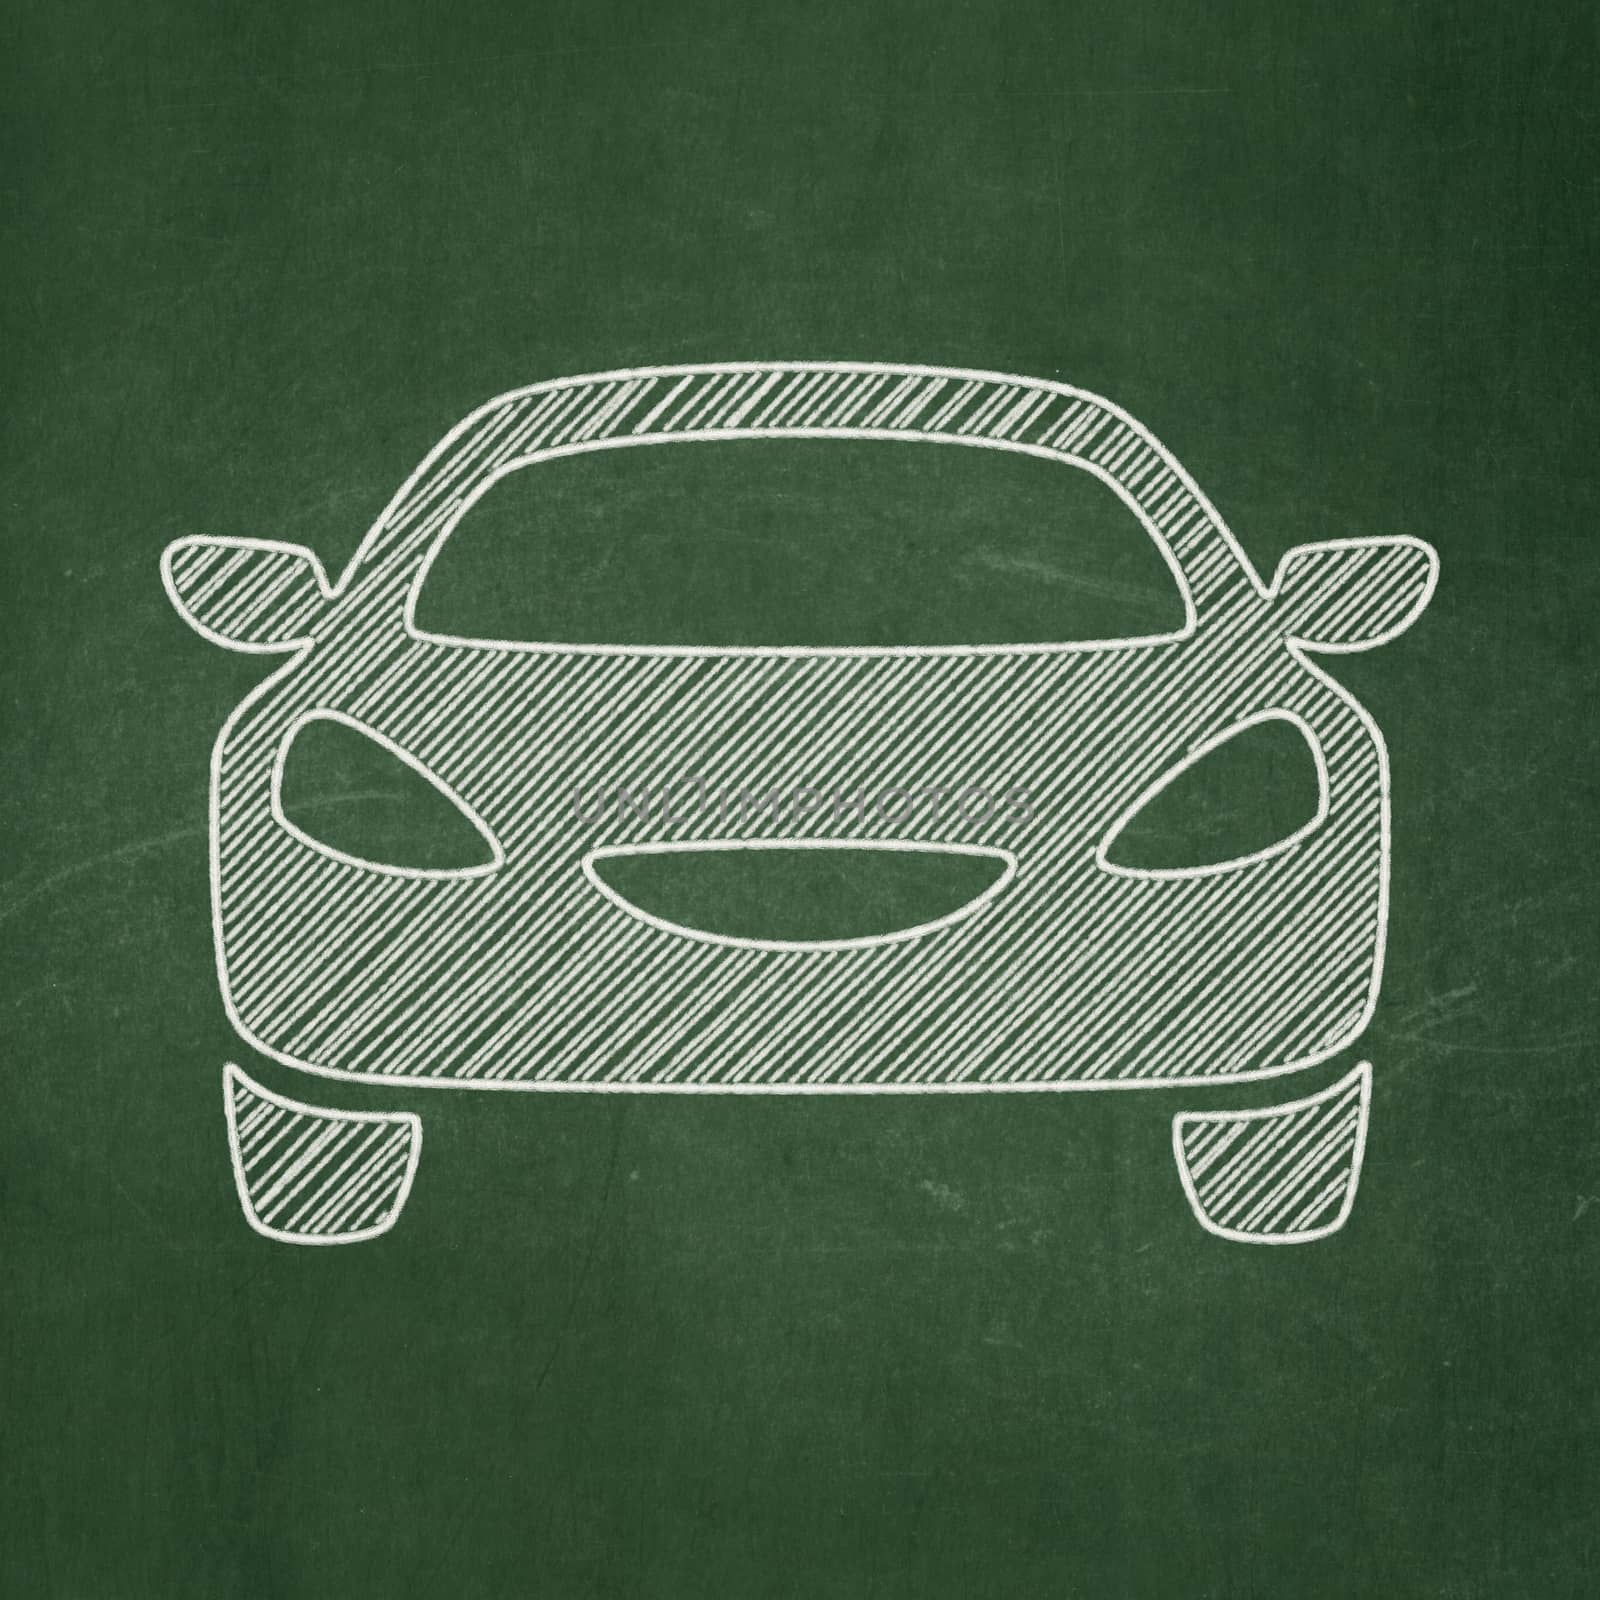 Travel concept: Car icon on Green chalkboard background